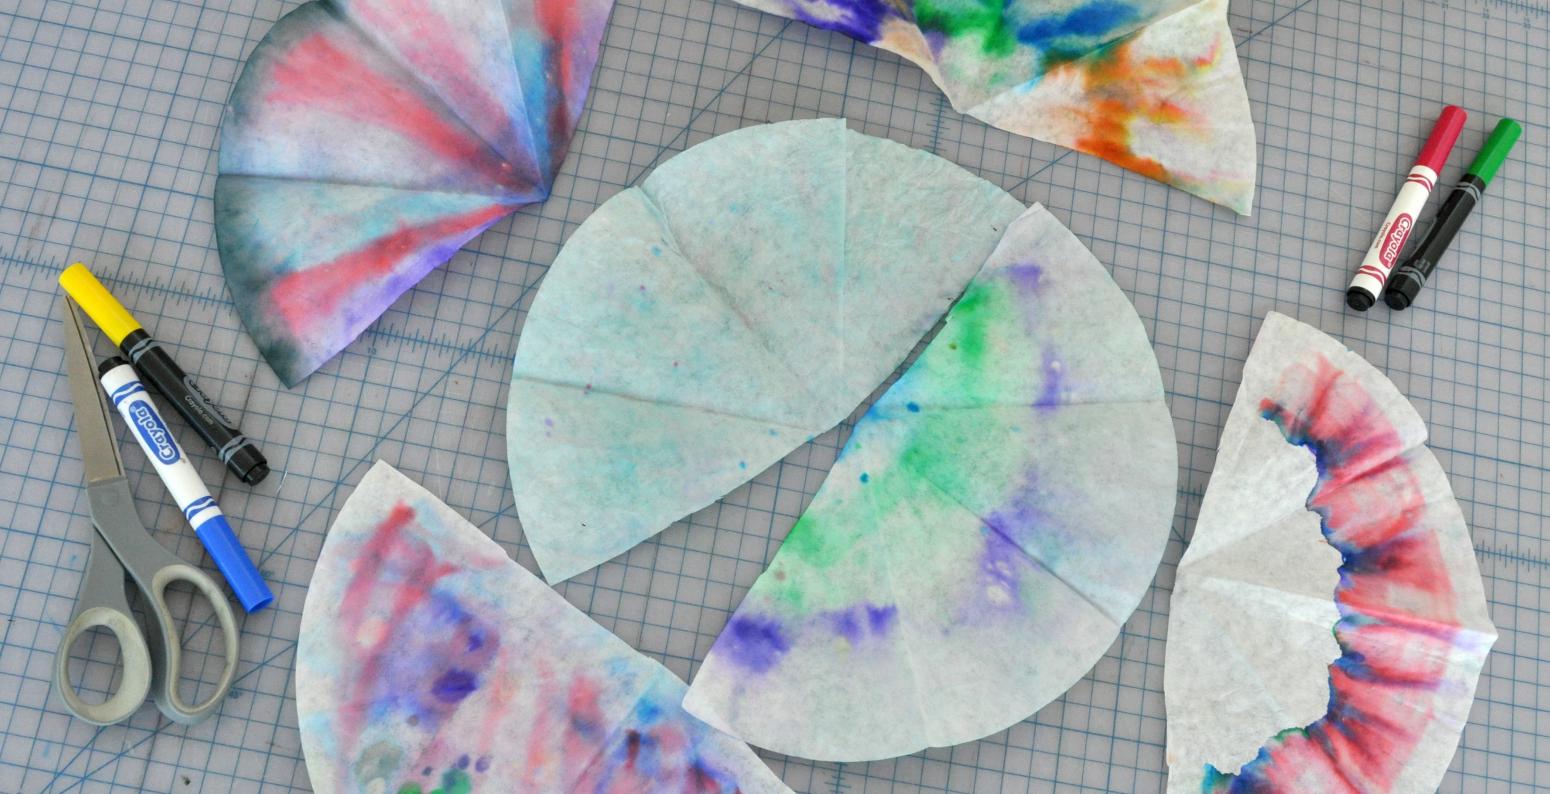 Six coffee filters that have been drawn on with markers then sprayed with, or dipped in, water to make the colors run through the filter.